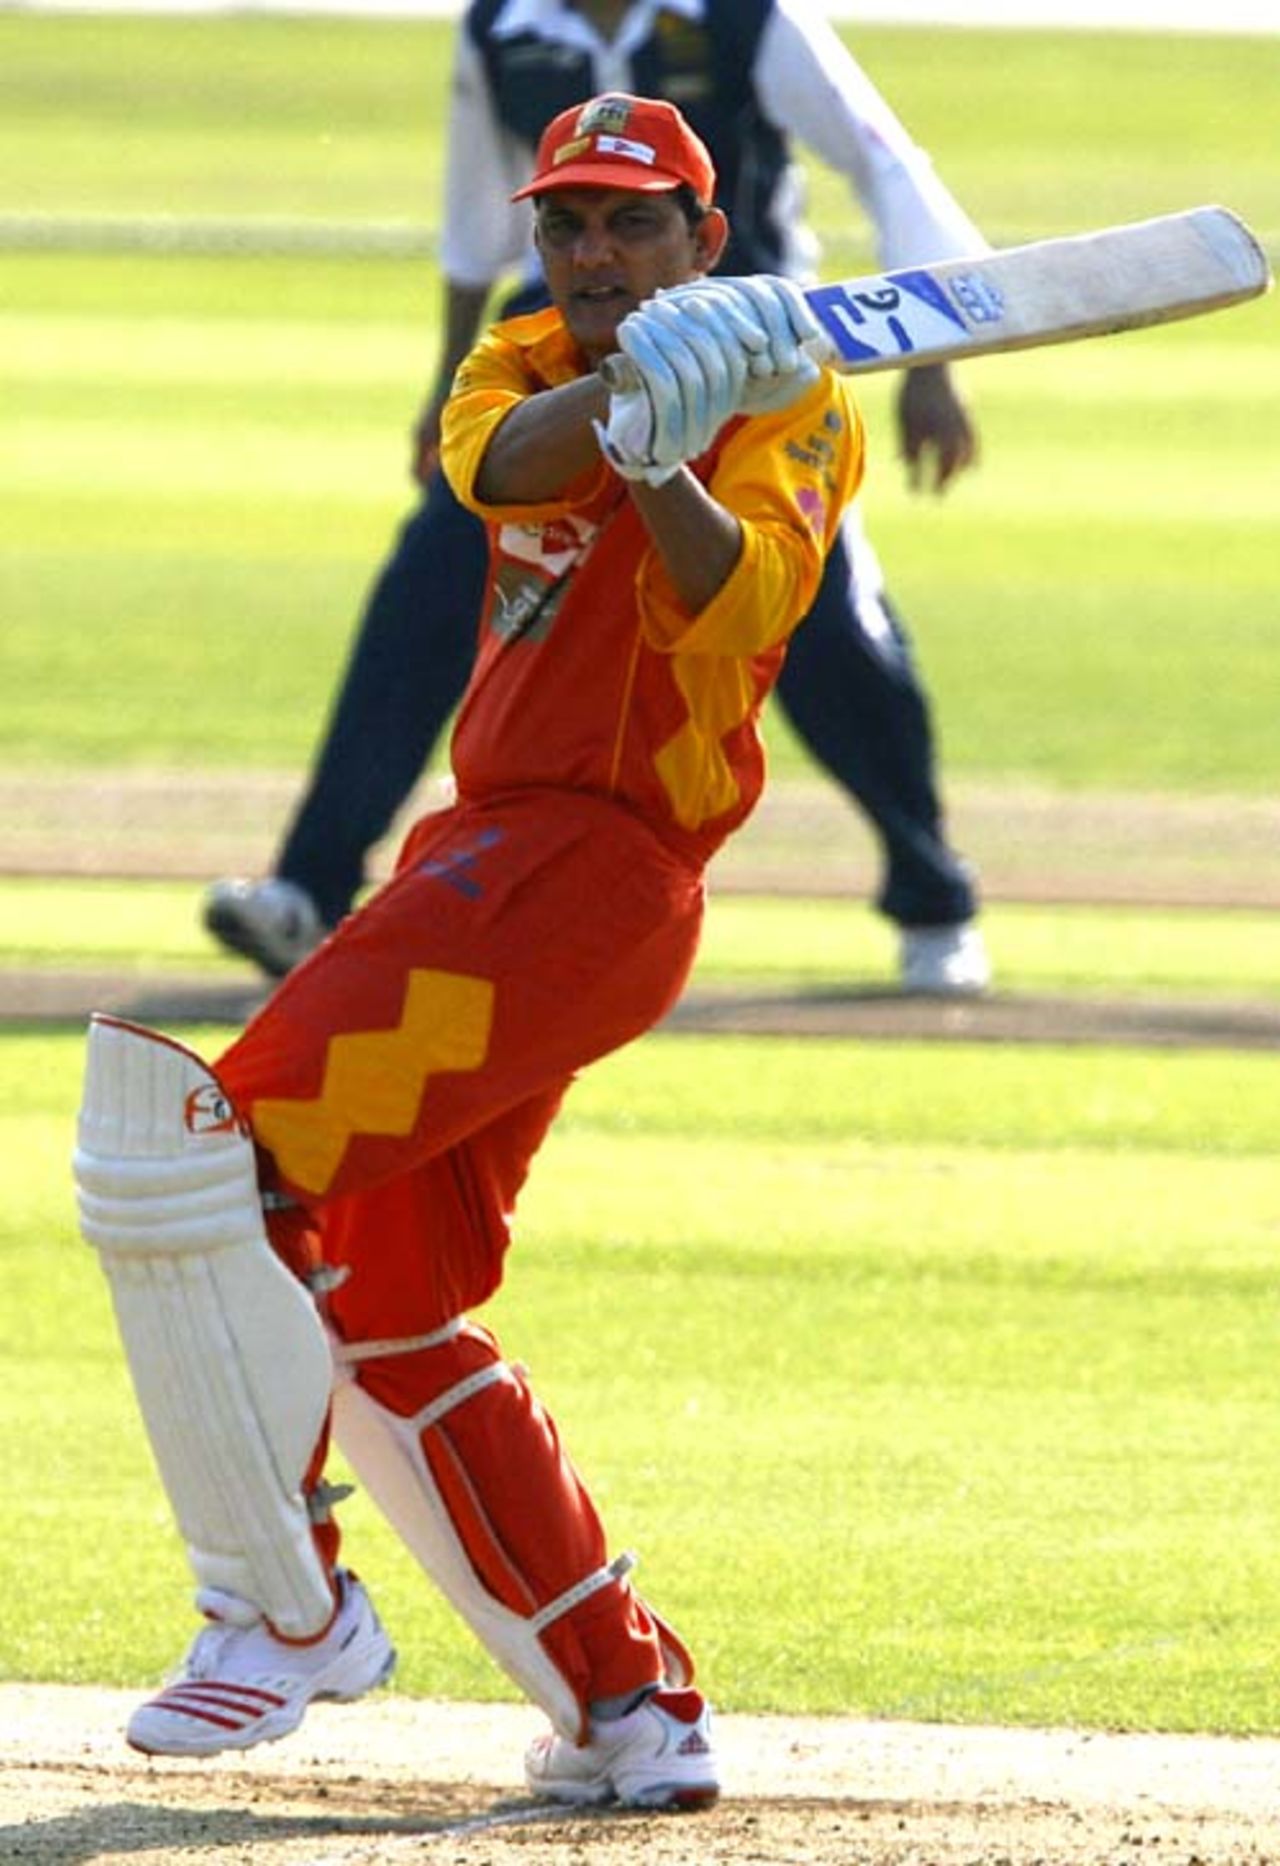 Mohammad Azharuddin in action during a celebrity match at Headingley, June 8, 2007